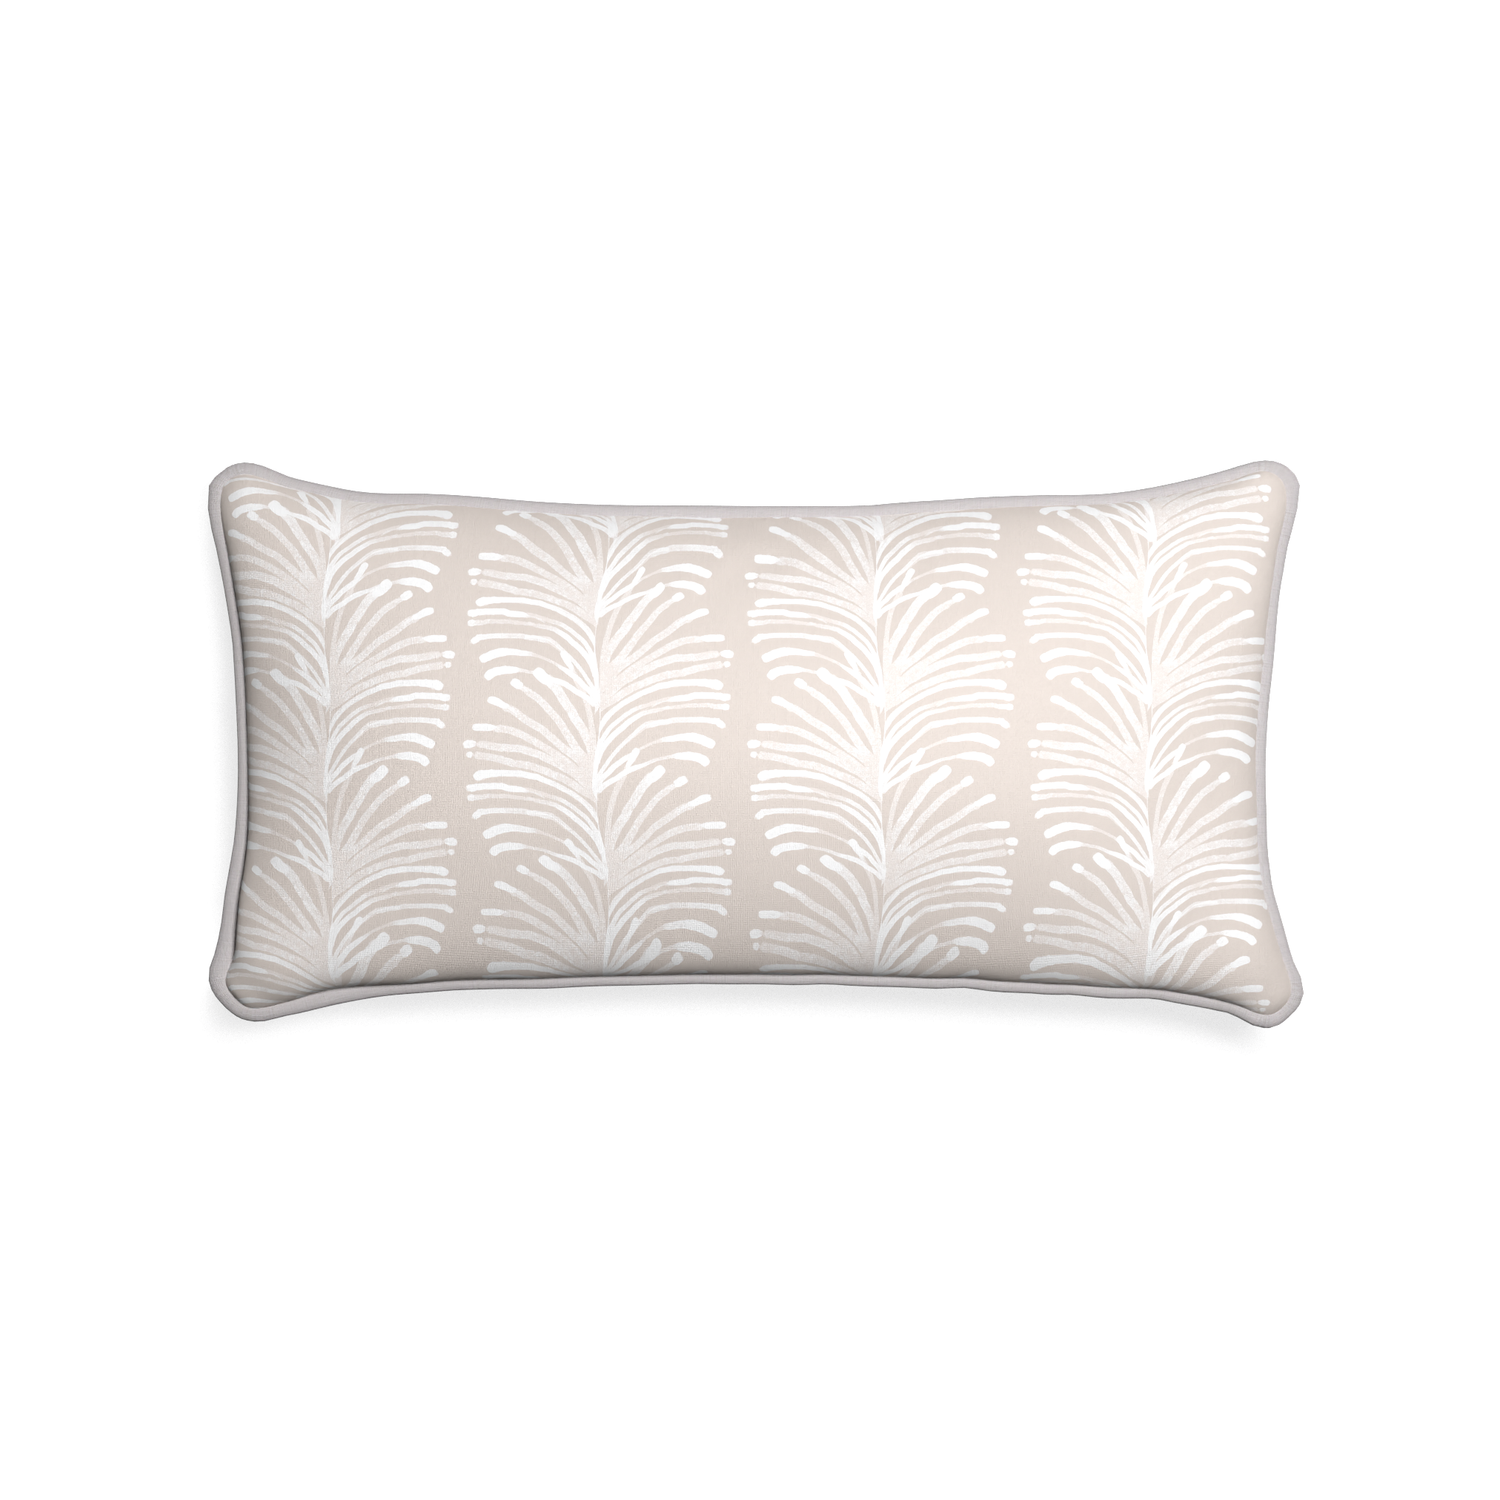 Midi-lumbar emma sand custom sand colored botanical stripepillow with pebble piping on white background